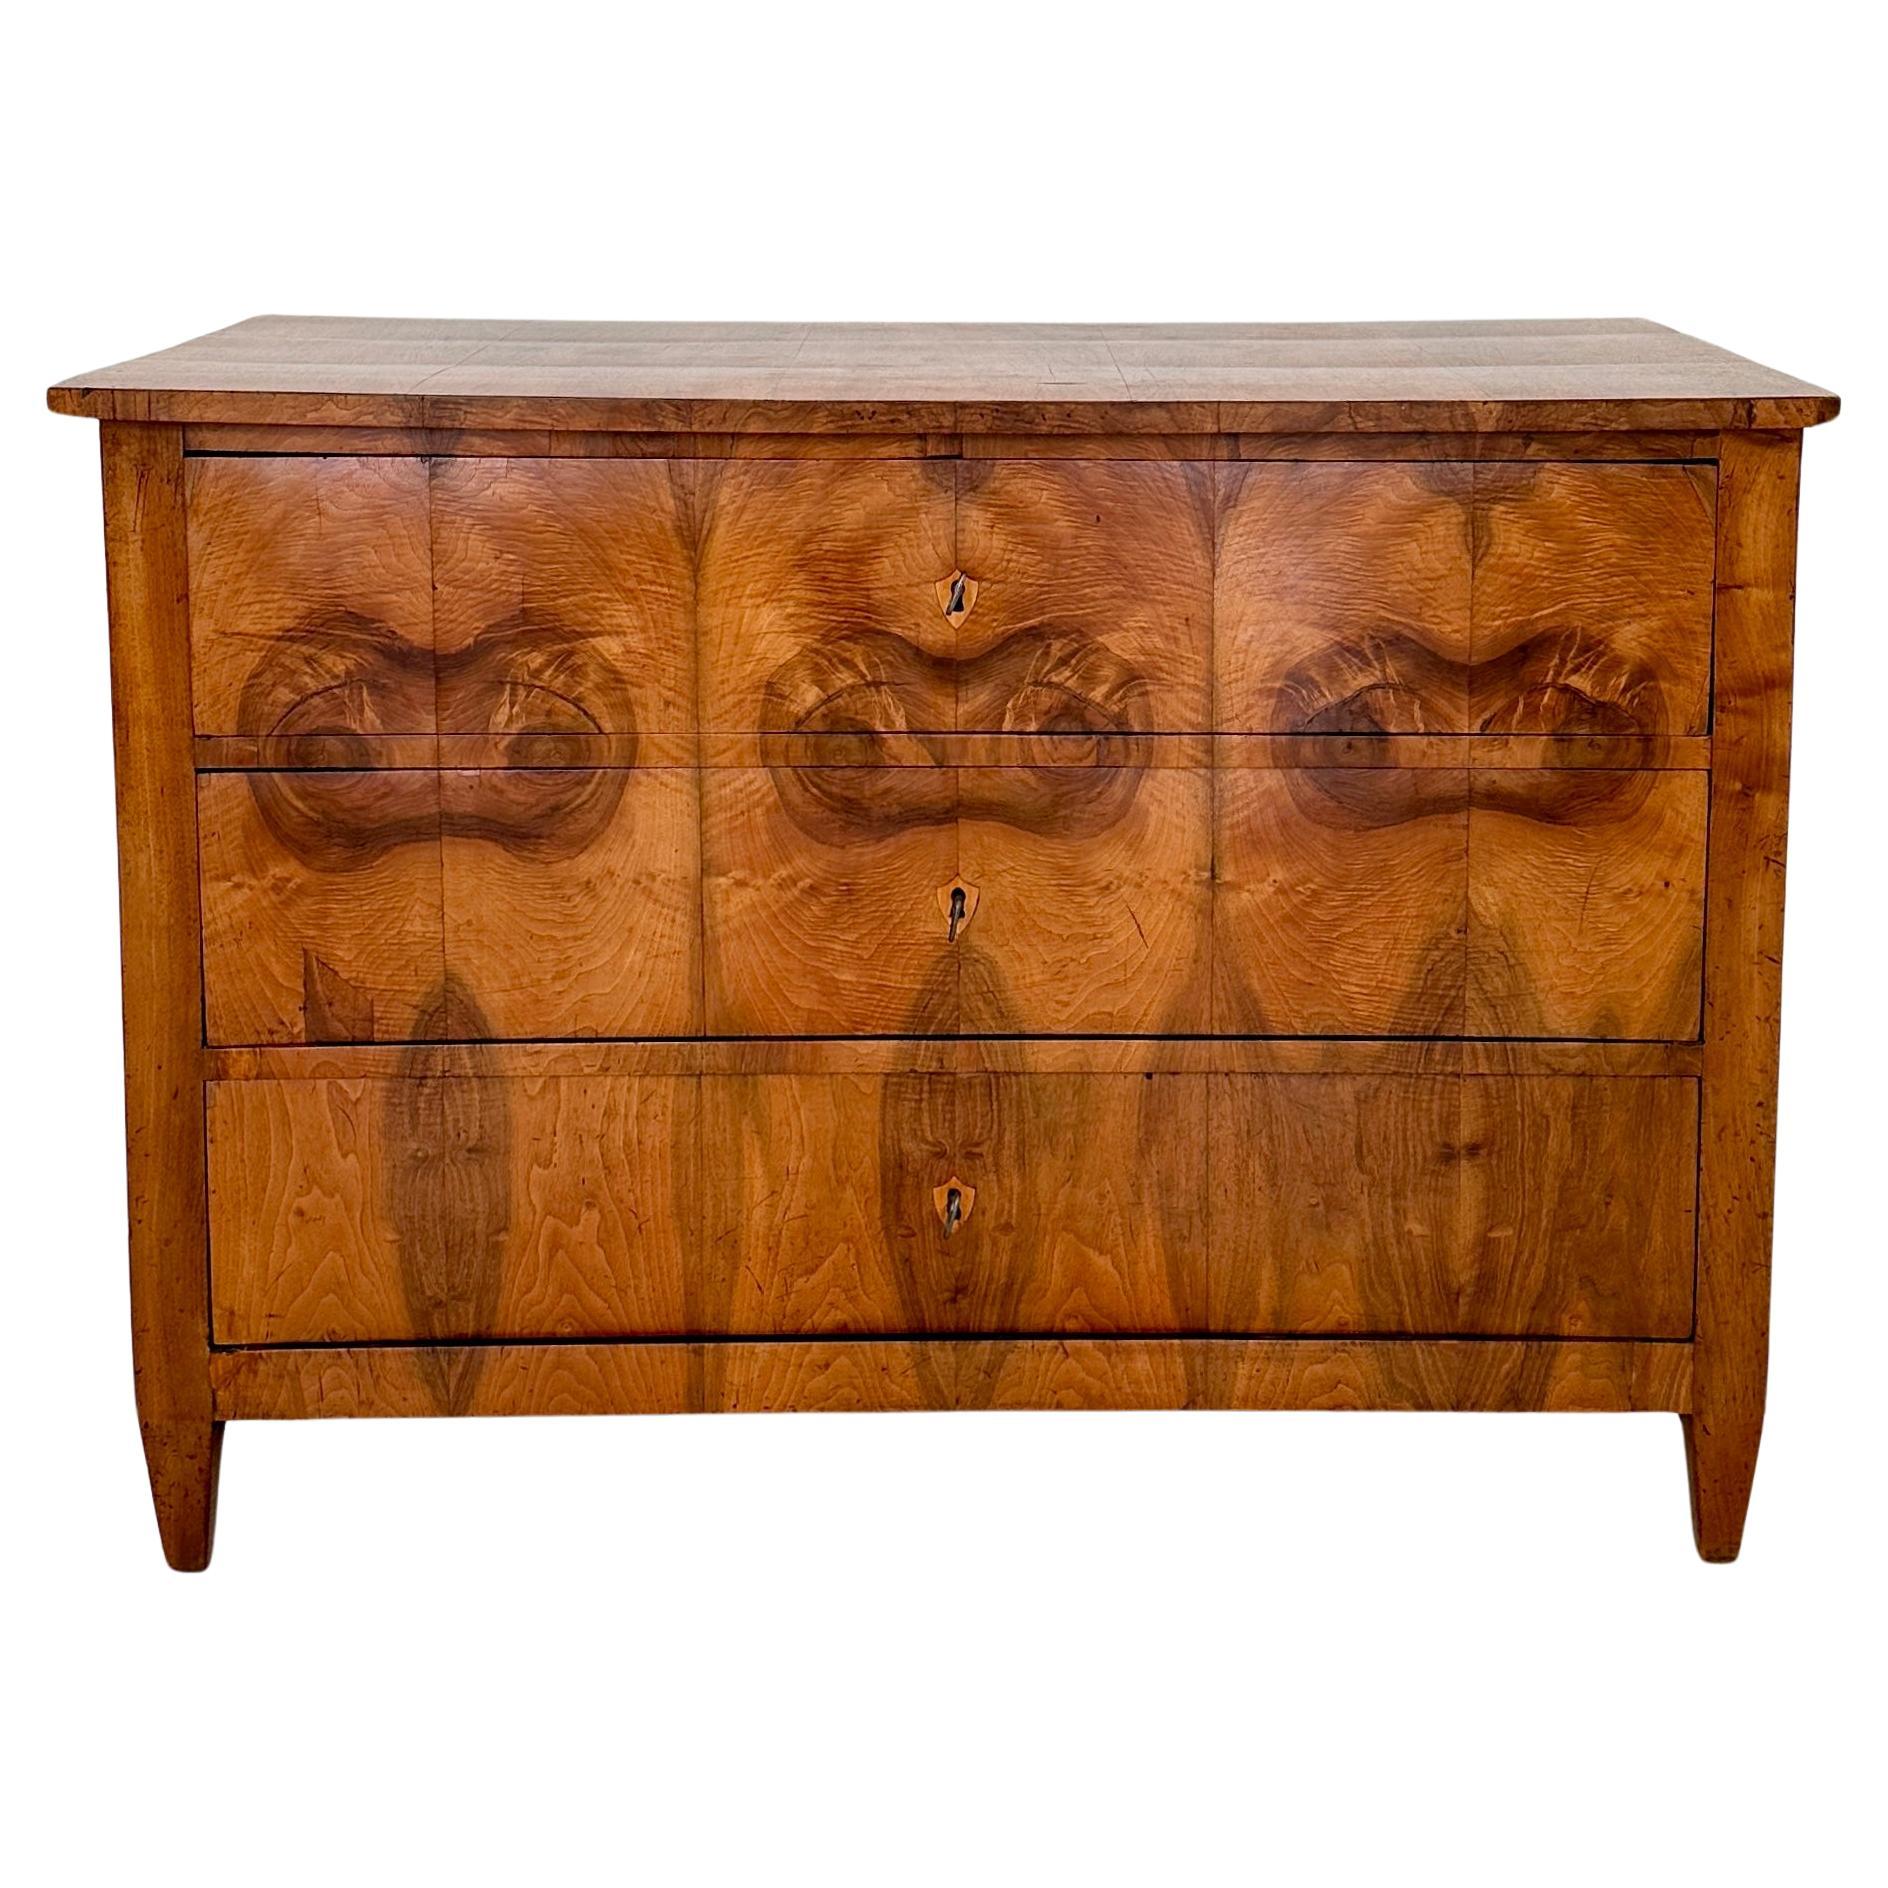 19th Century German Biedermeier Chest of Drawers in Walnut with 3 Drawers, 1820